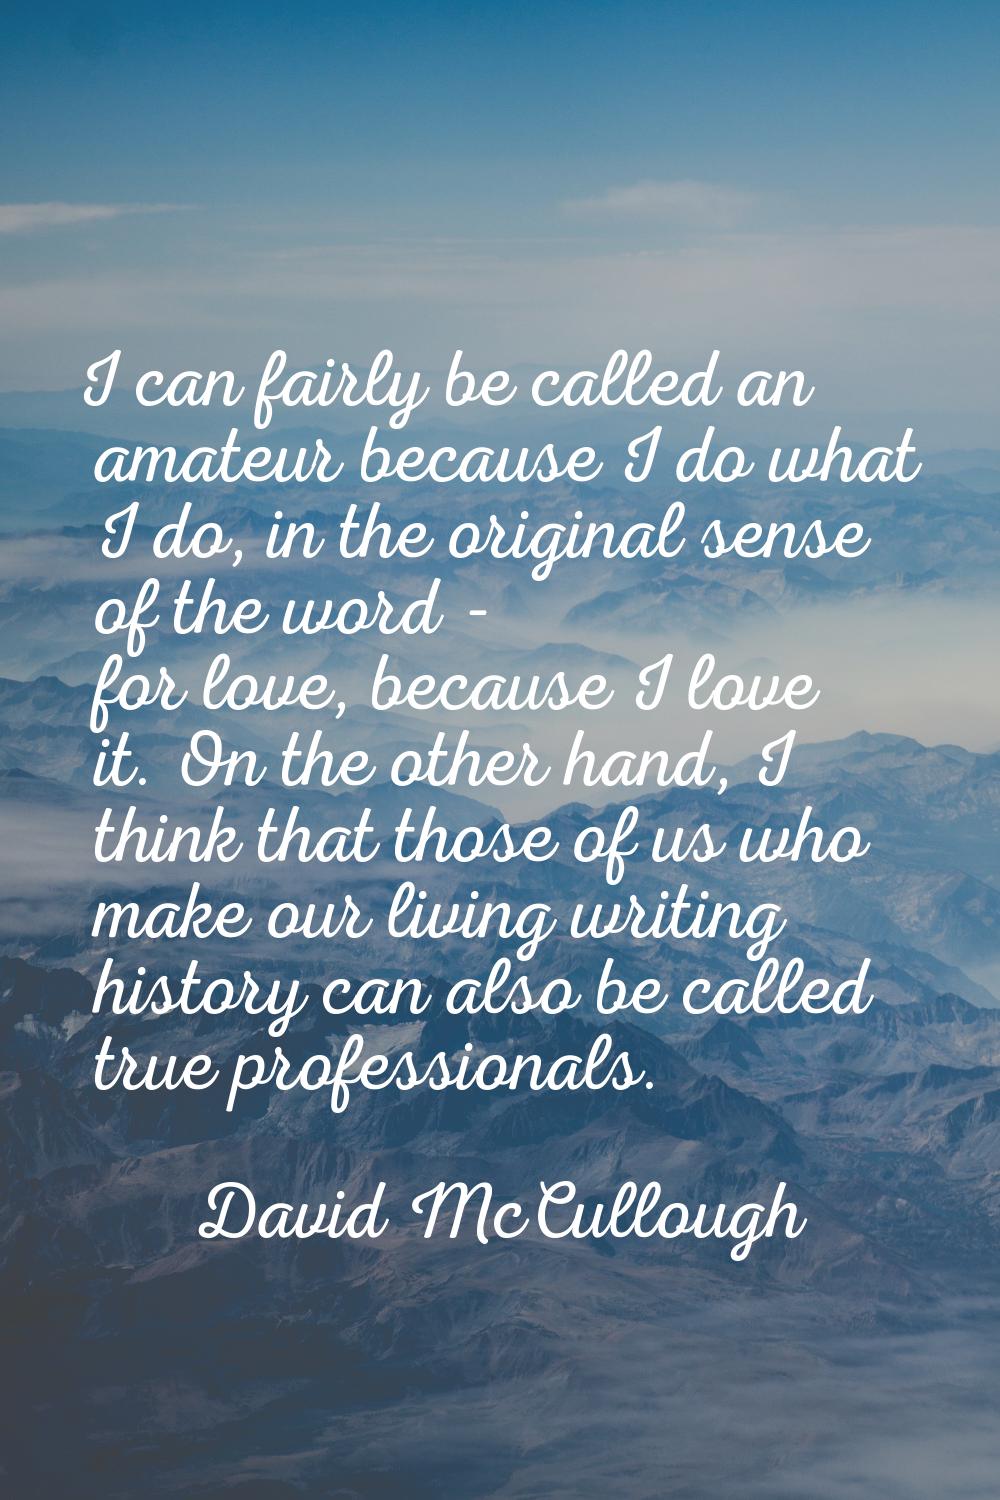 I can fairly be called an amateur because I do what I do, in the original sense of the word - for l